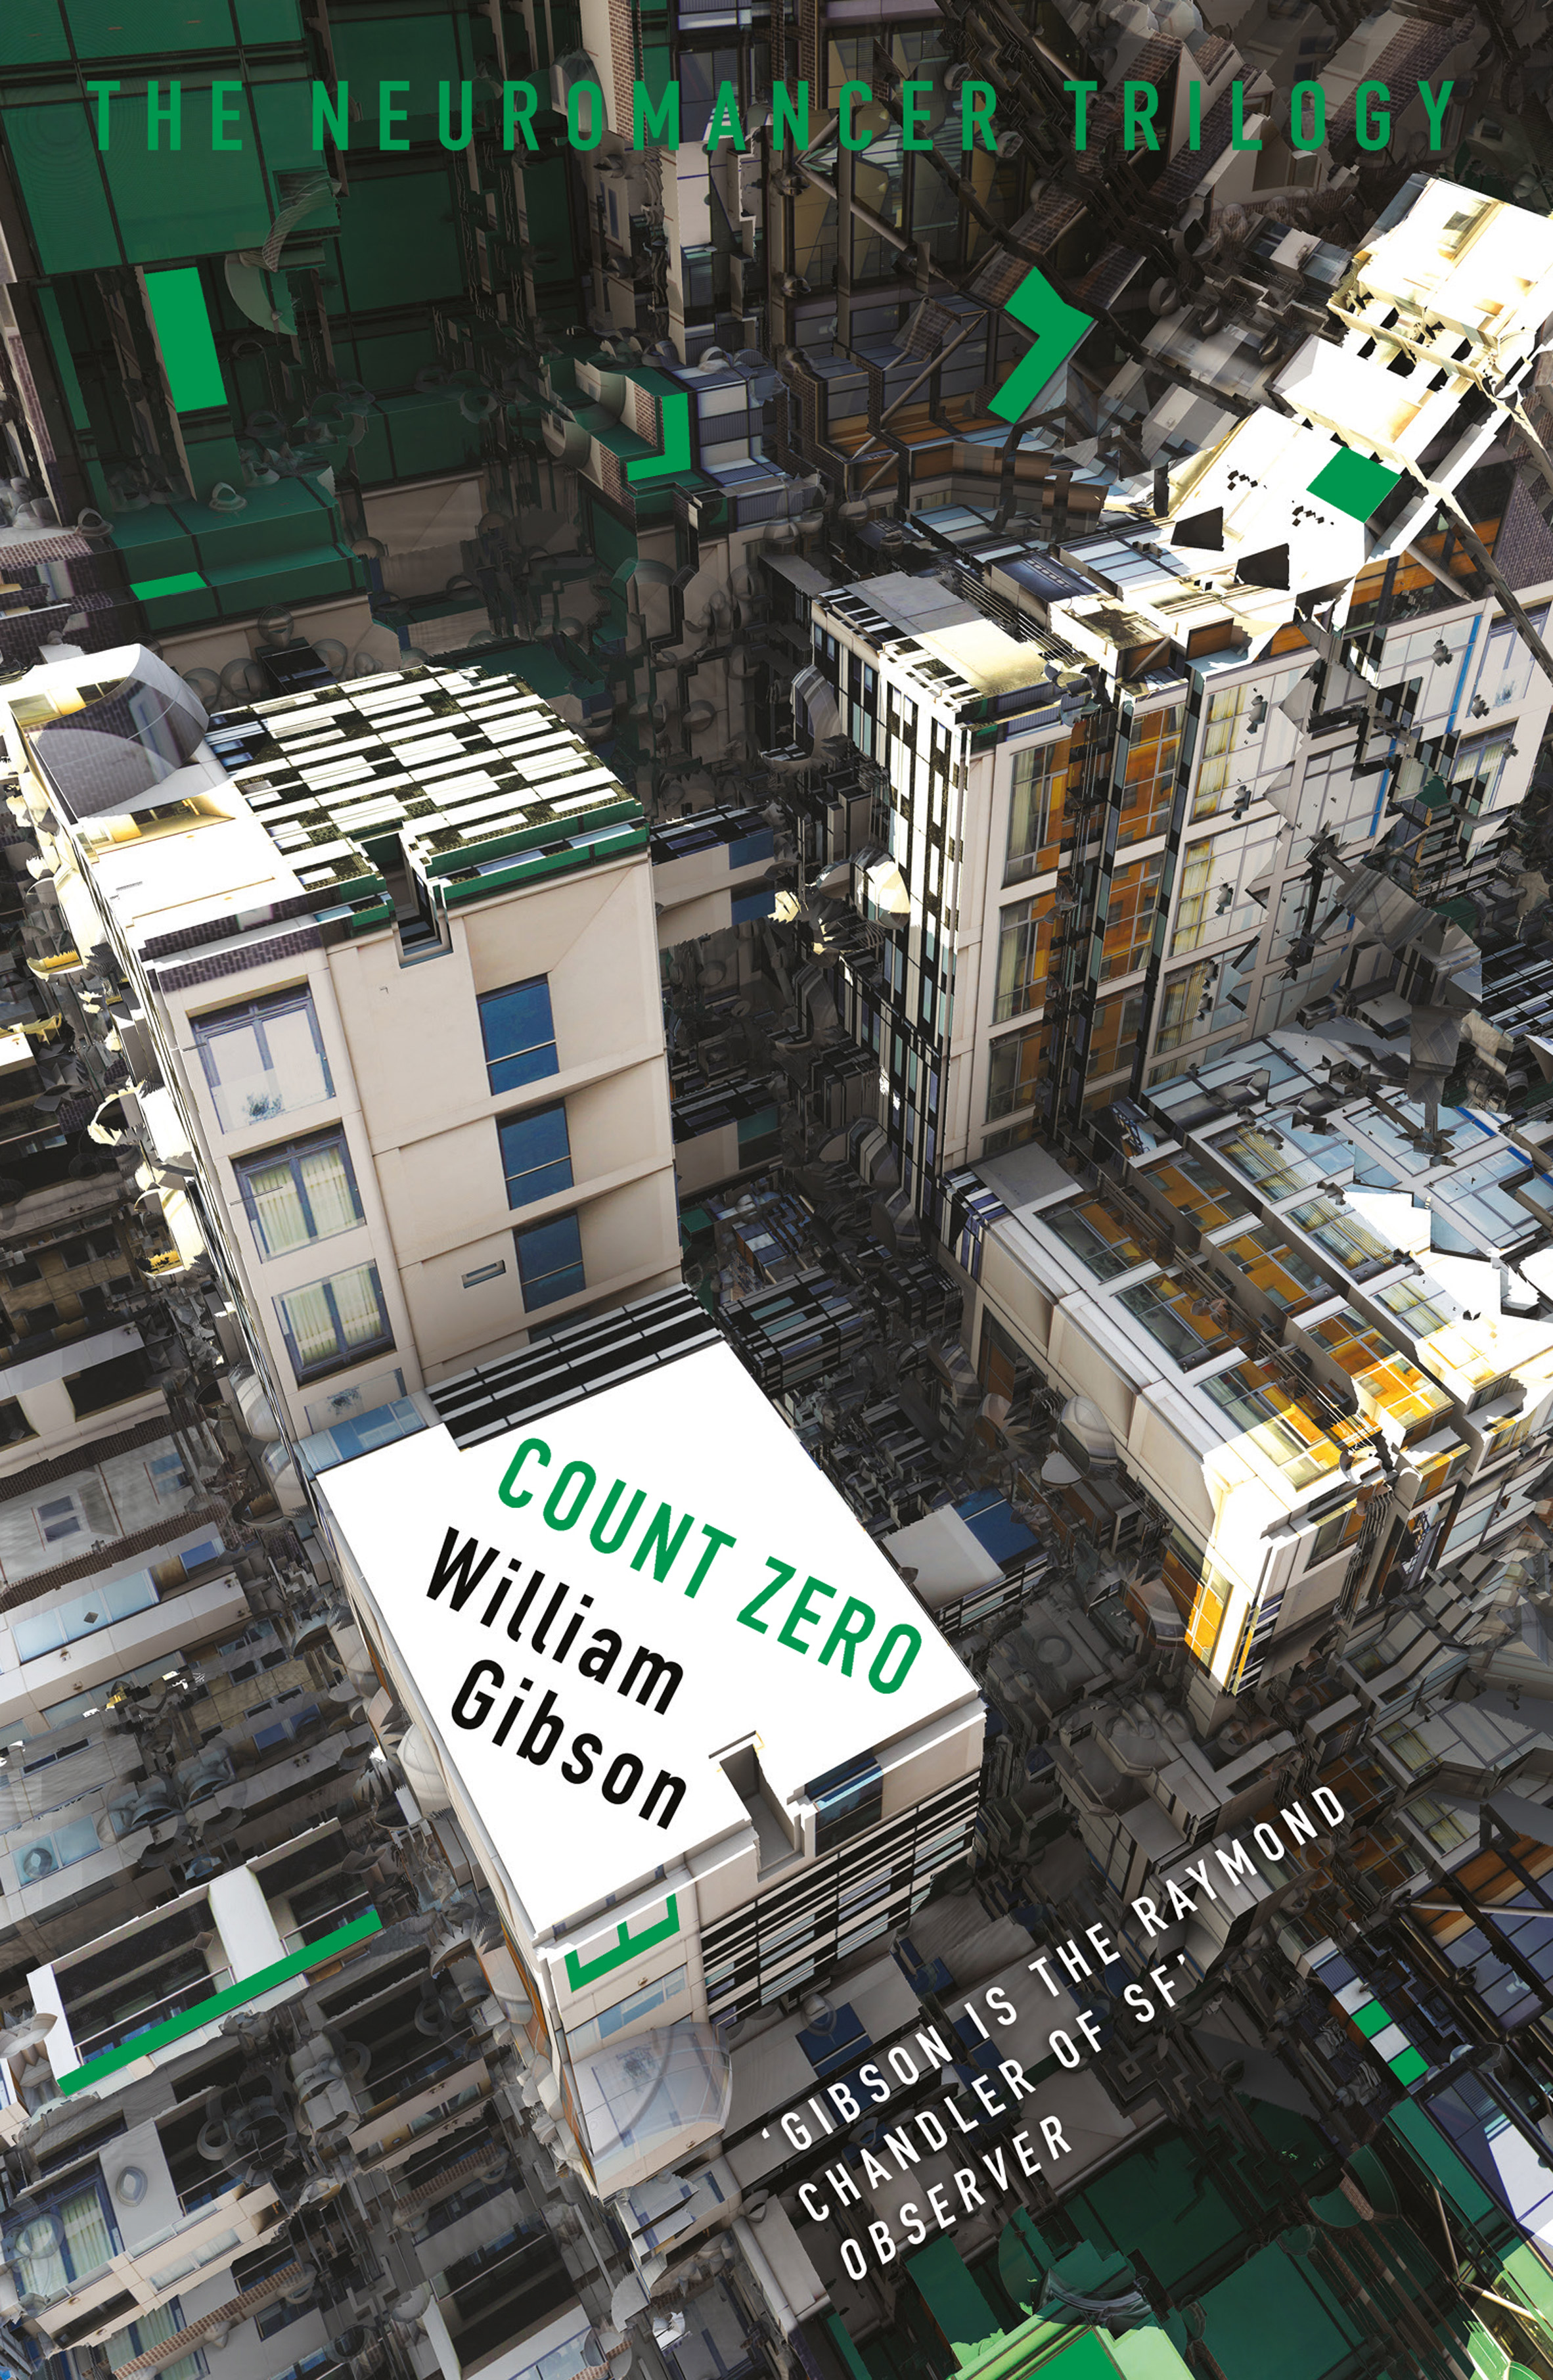 William Gibson book covers based on fractals of architecture